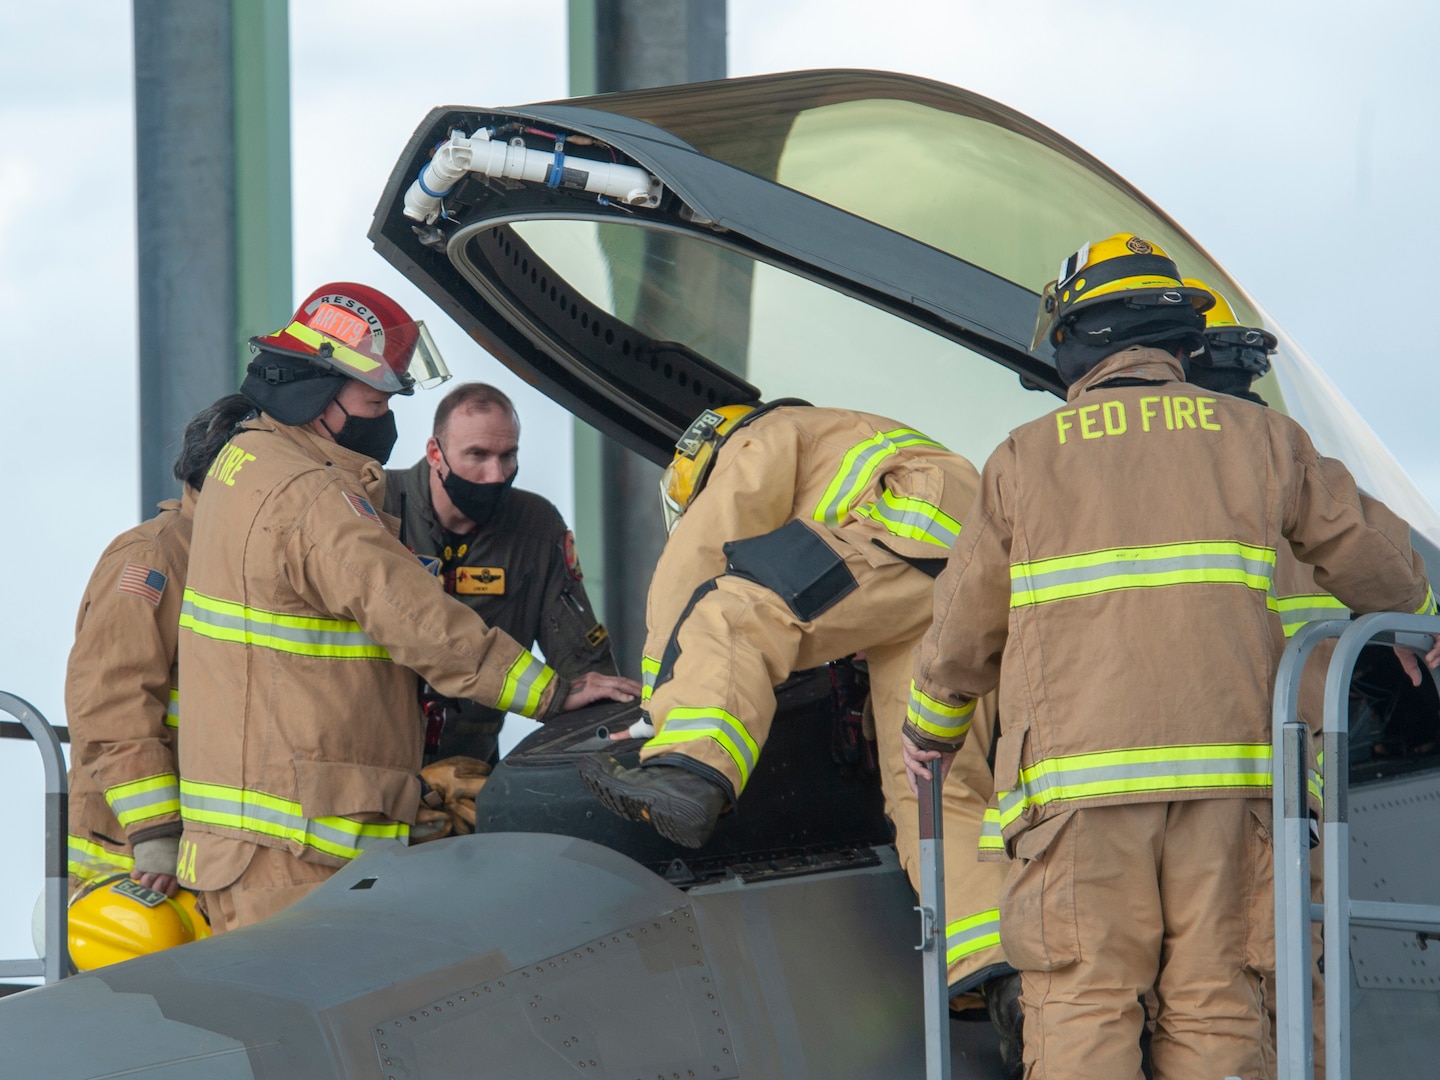 Lt. Col. Steven Augugliaro, 154th Wing F-22 flight safety officer, works with members of the Federal Fire Department during a pilot extraction exercise Nov. 20, 2020, at Joint Base Pearl Harbor-Hickam, Hawaii.